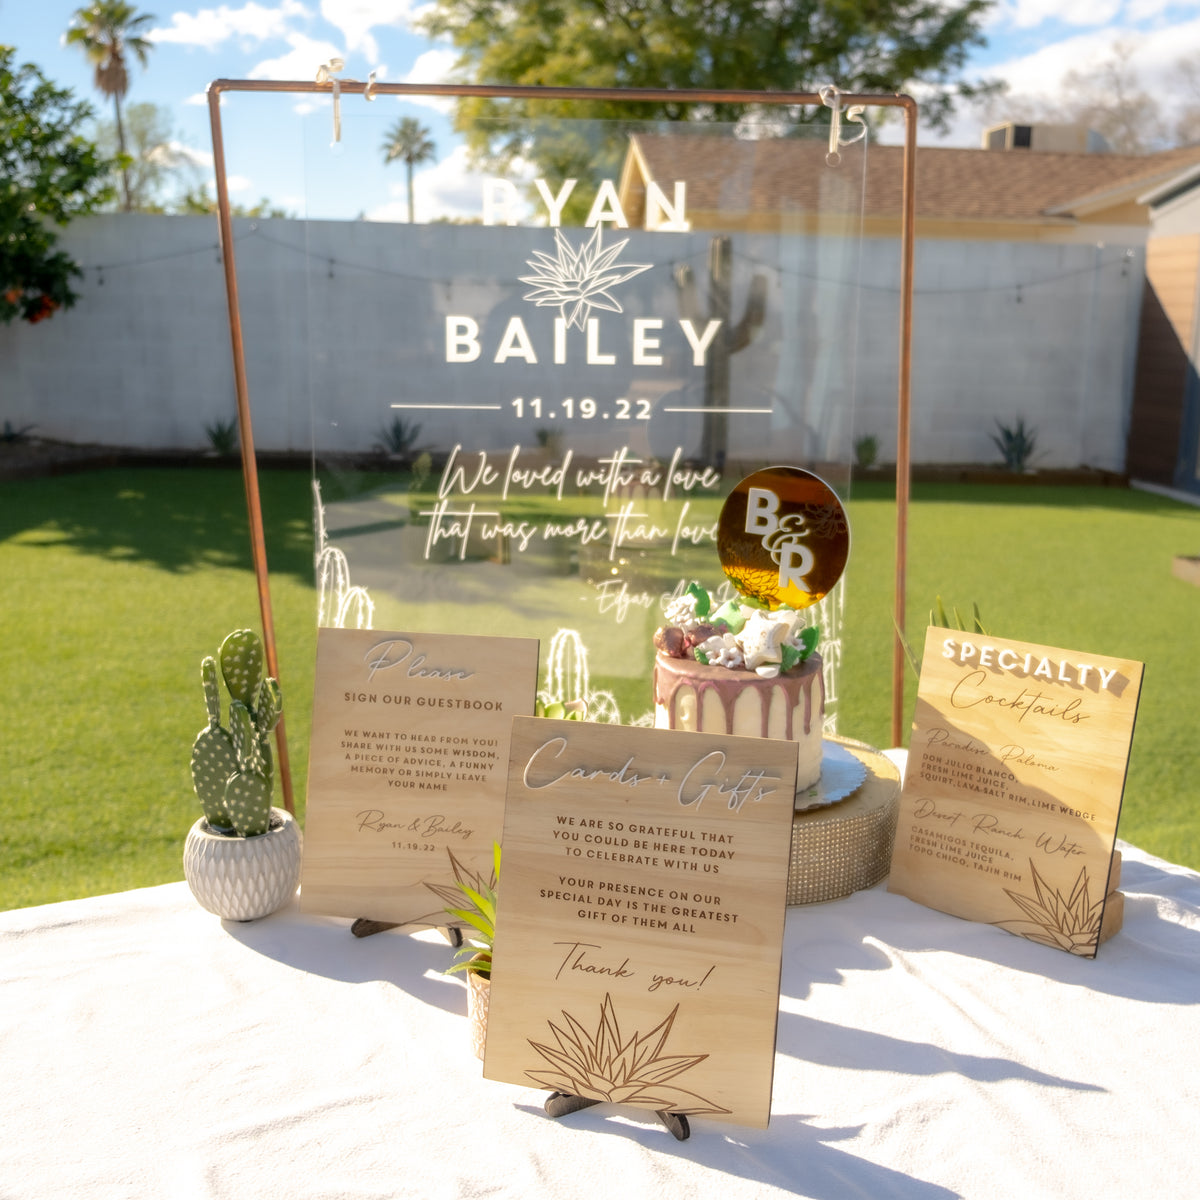 45 Guest Books From Real Weddings